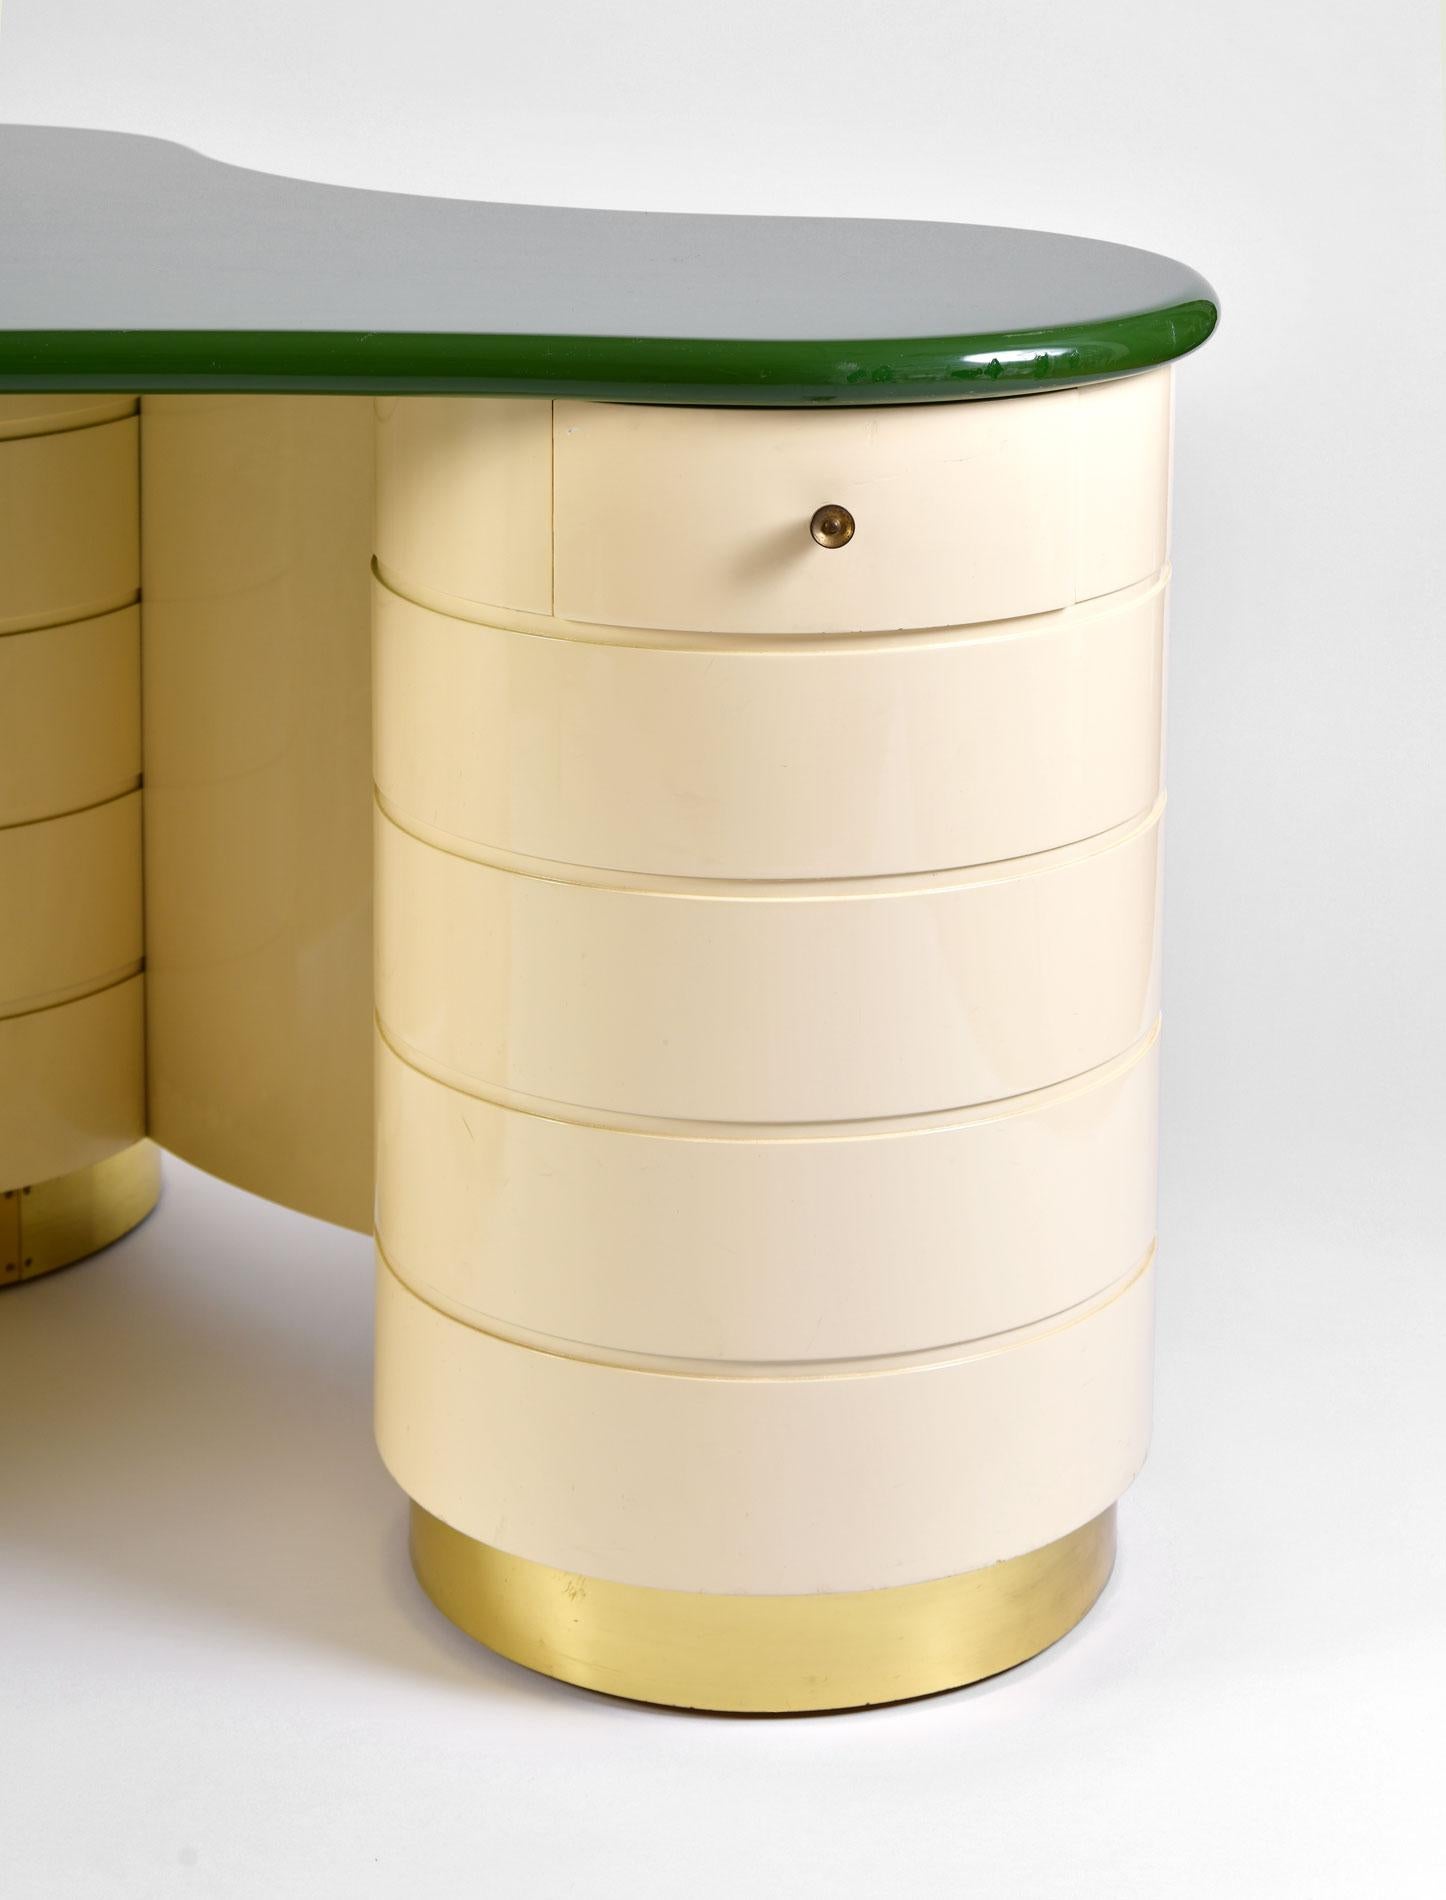 Mid-20th Century Rare 1960s Green and Cream Italian Dressing Table or Vanity